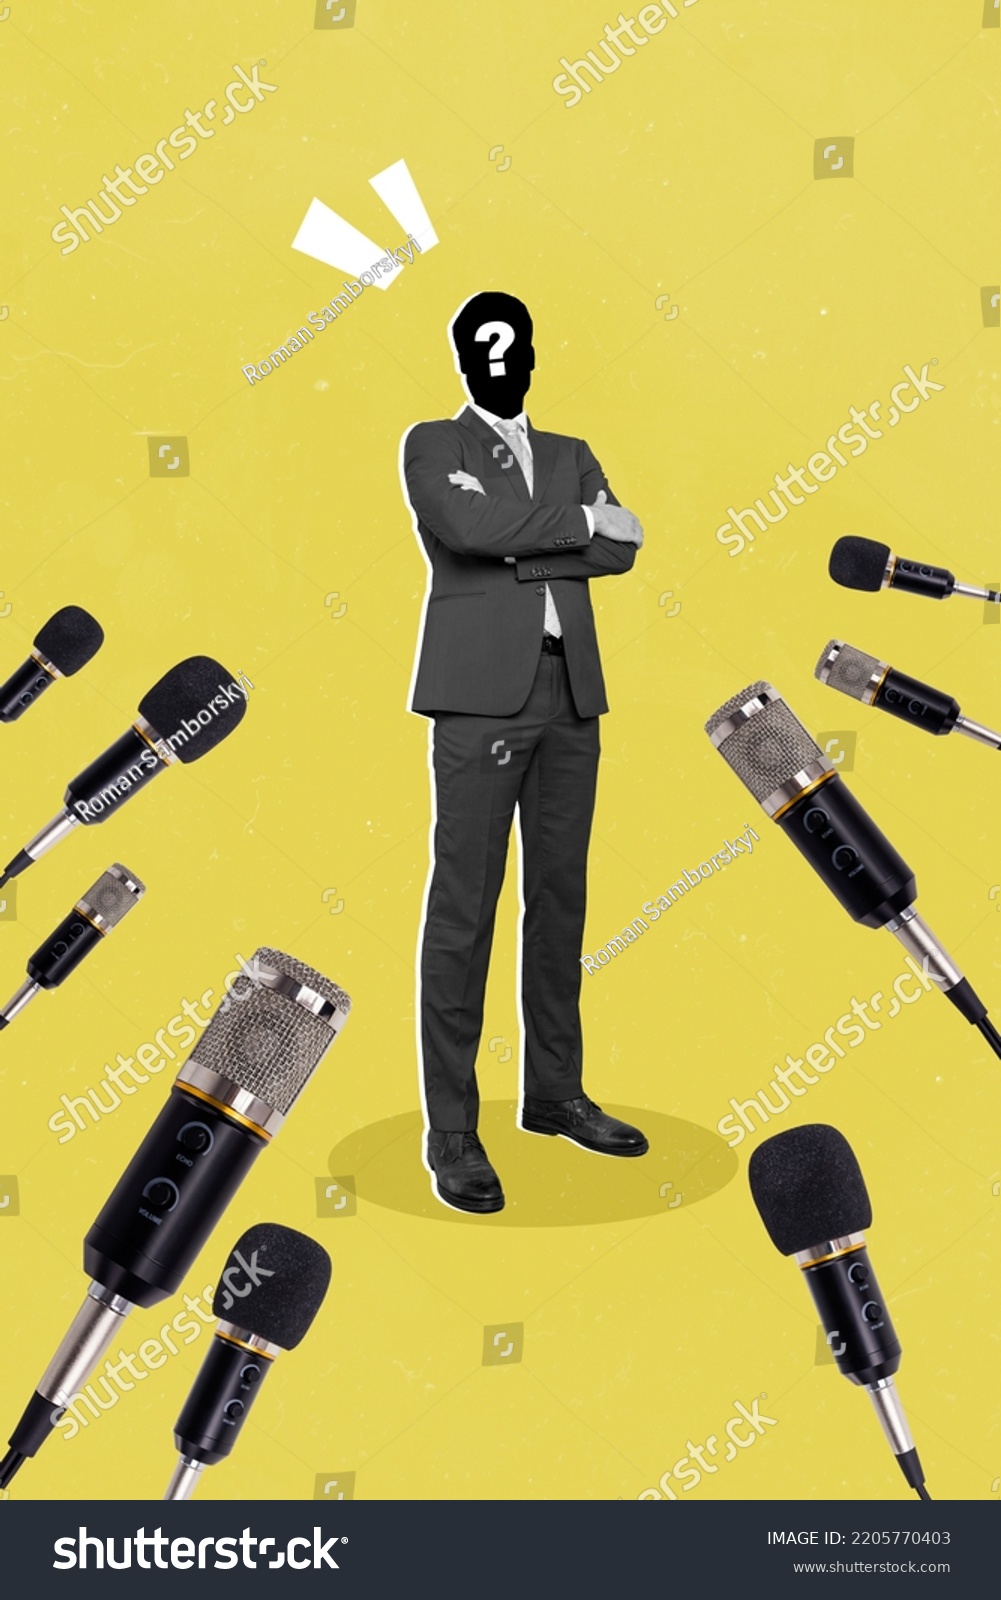 Vertical collage picture of unknown secret person folded arms journalists microphones isolated on yellow background #2205770403